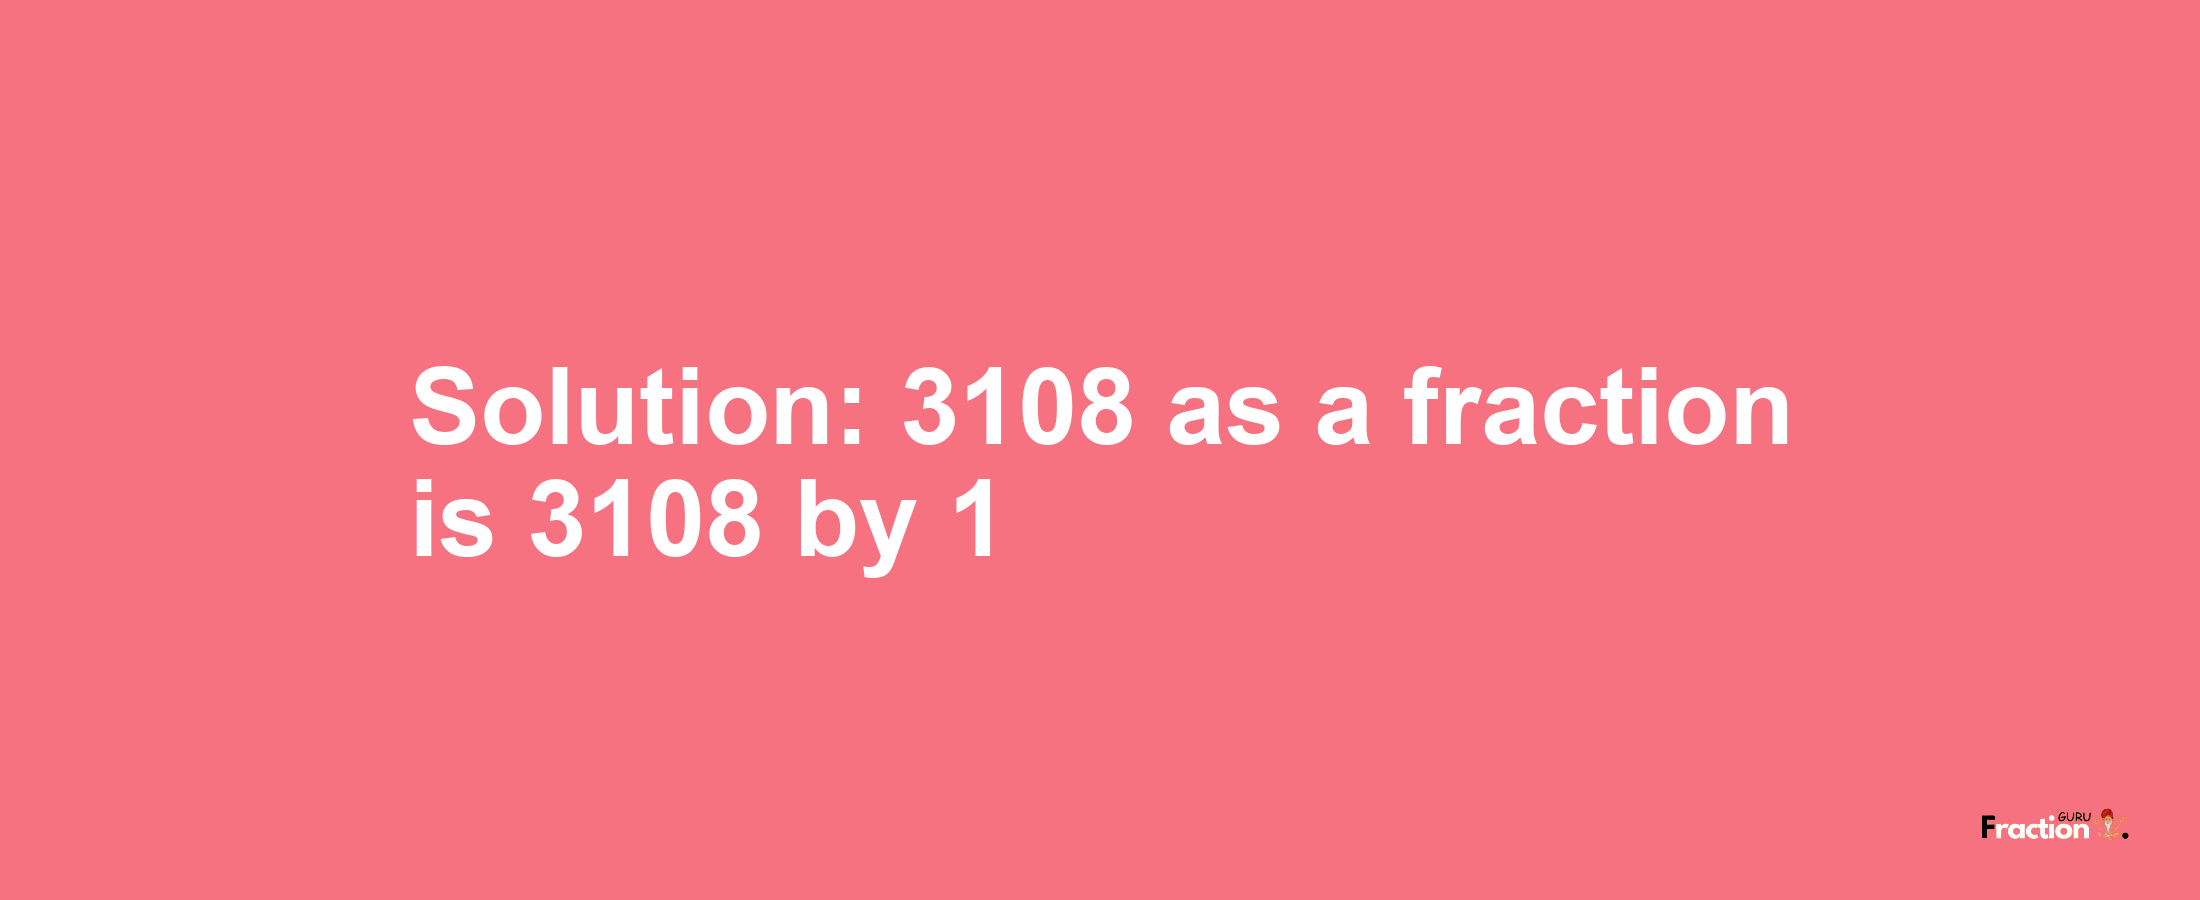 Solution:3108 as a fraction is 3108/1